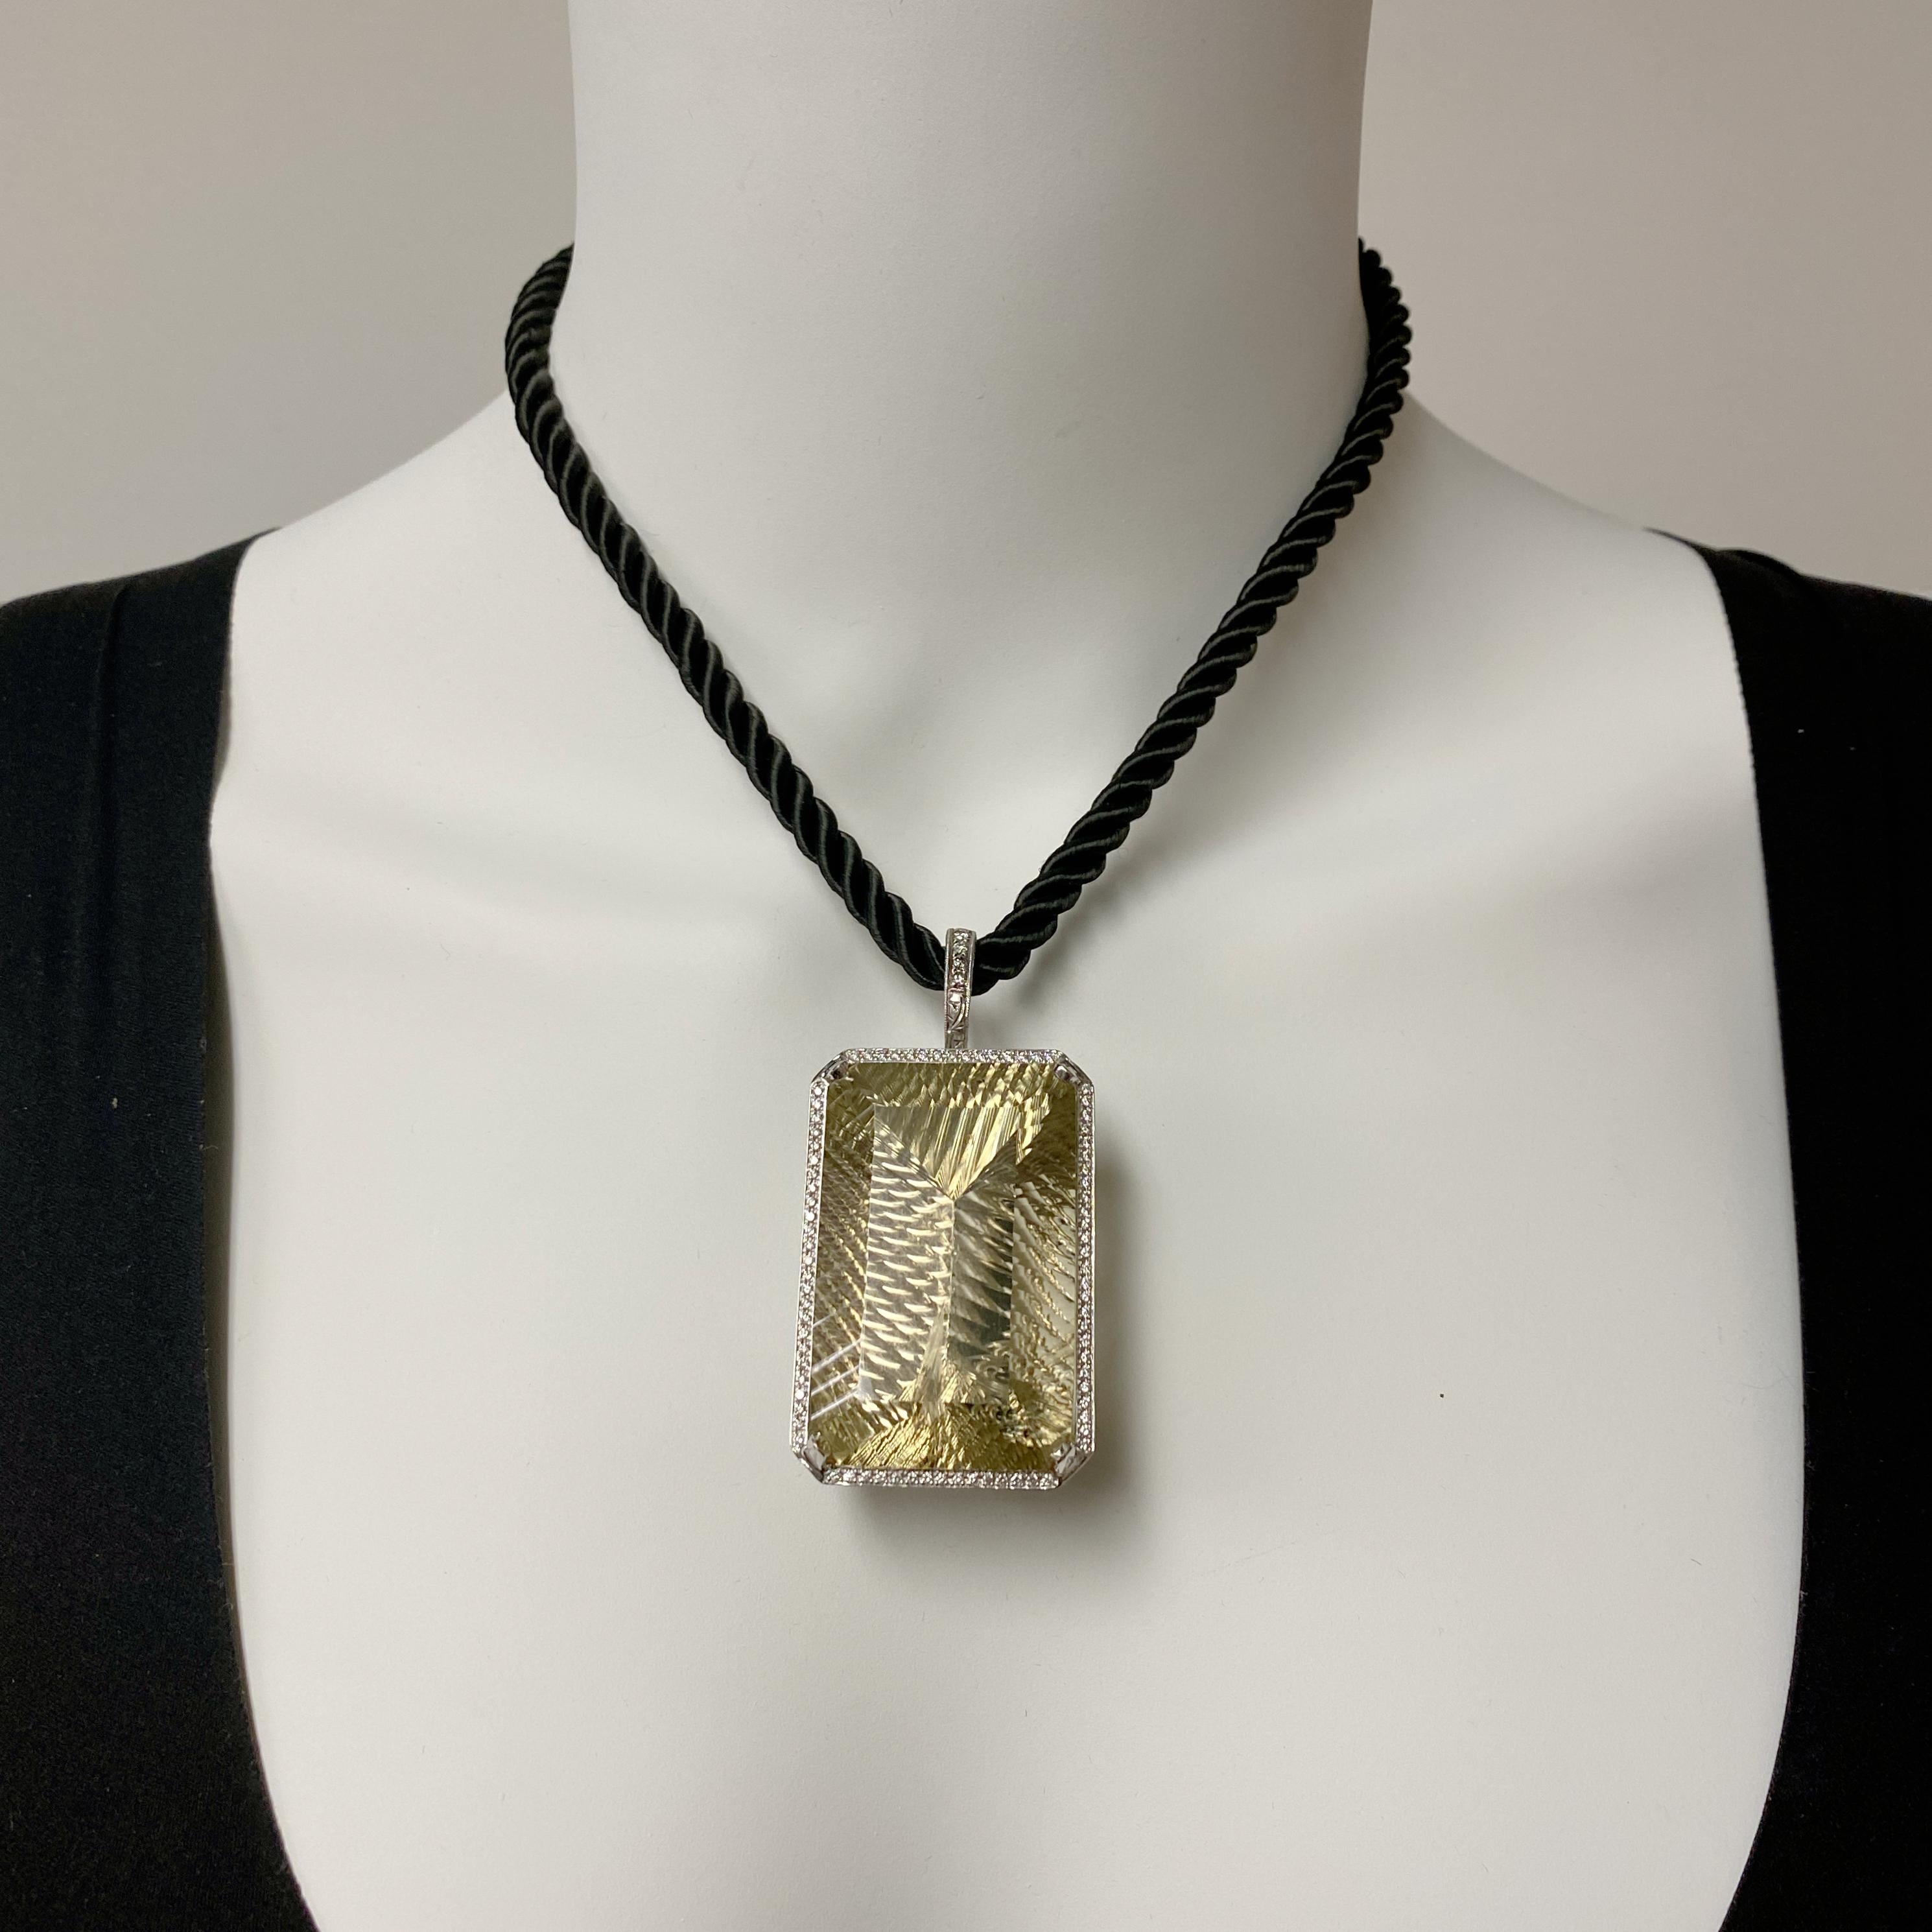 Story time!  About ten years ago, one of Eytan Brandes' customers bought this enormous quartz at a gem show and asked Eytan to make her a diamond pendant to show it off.  Eytan made the pendant, set the diamonds, added a fixed chain, then, well, he